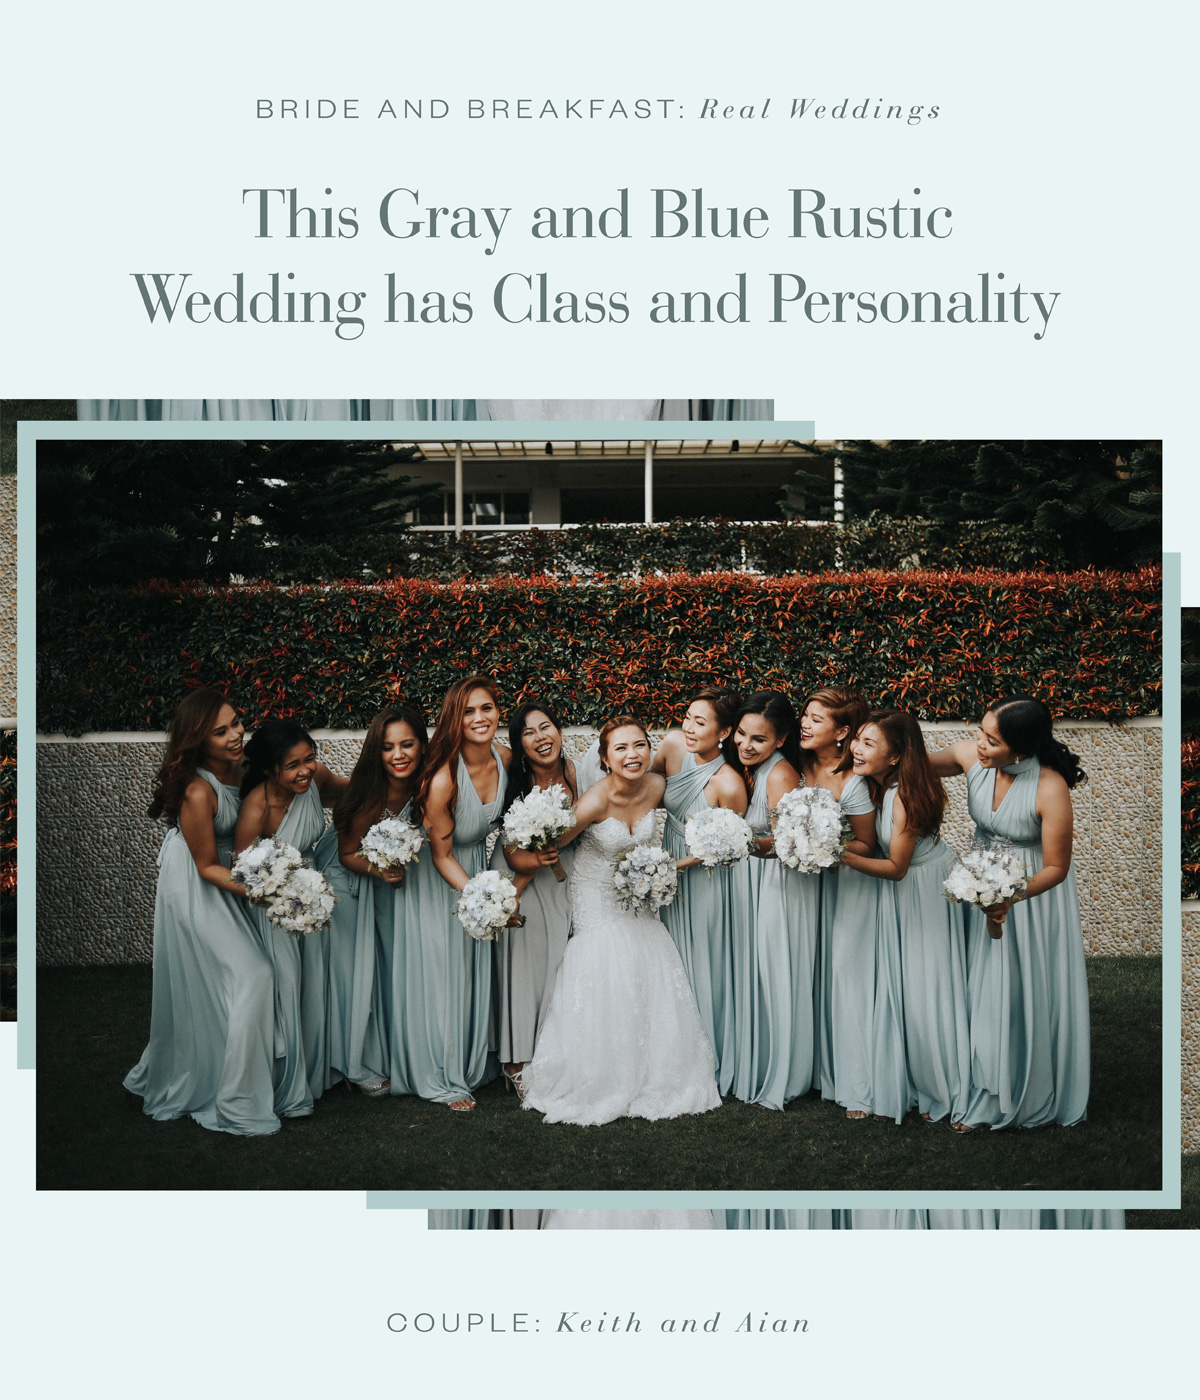 This gray and blue rustic wedding has class and personality